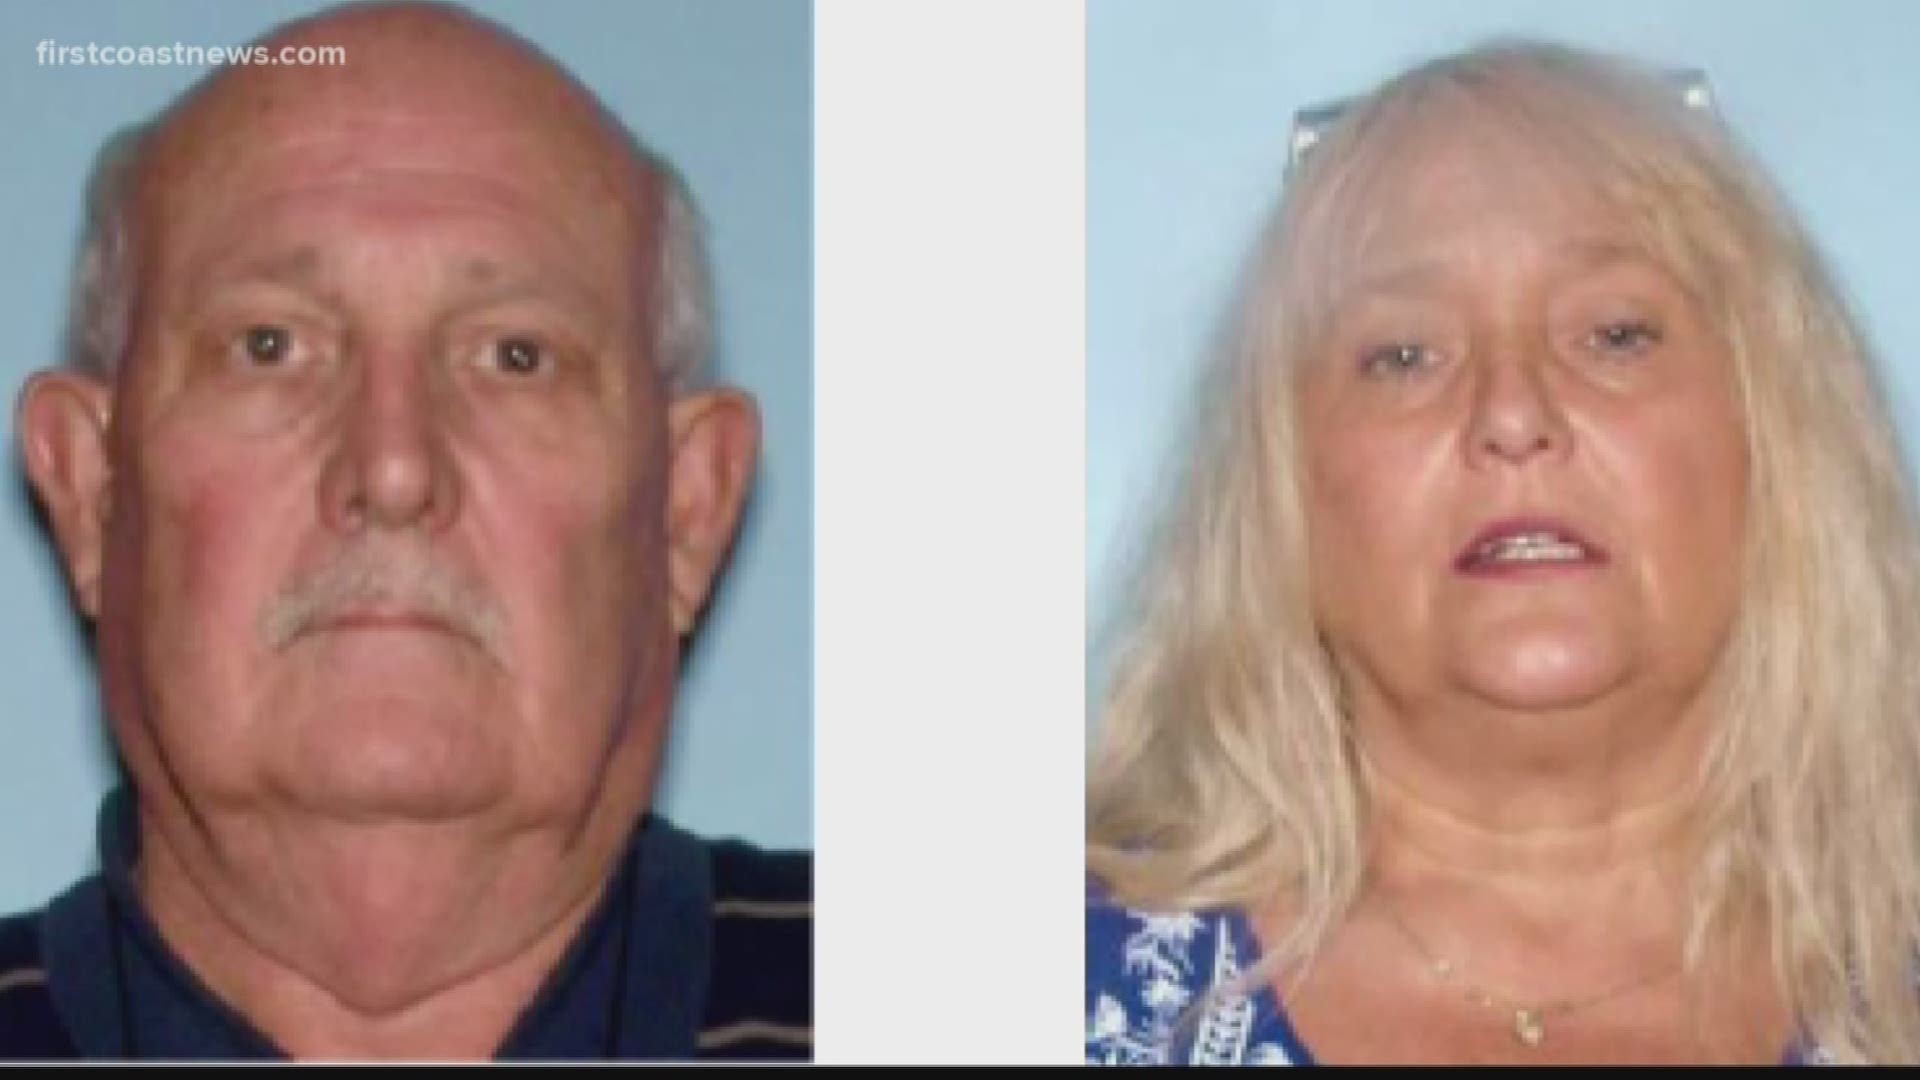 The Colemans have been charged with defrauding customers who paid the pair for workers’ compensation insurance and other lines of insurance. The indictment handed down includes 10 separate victims.